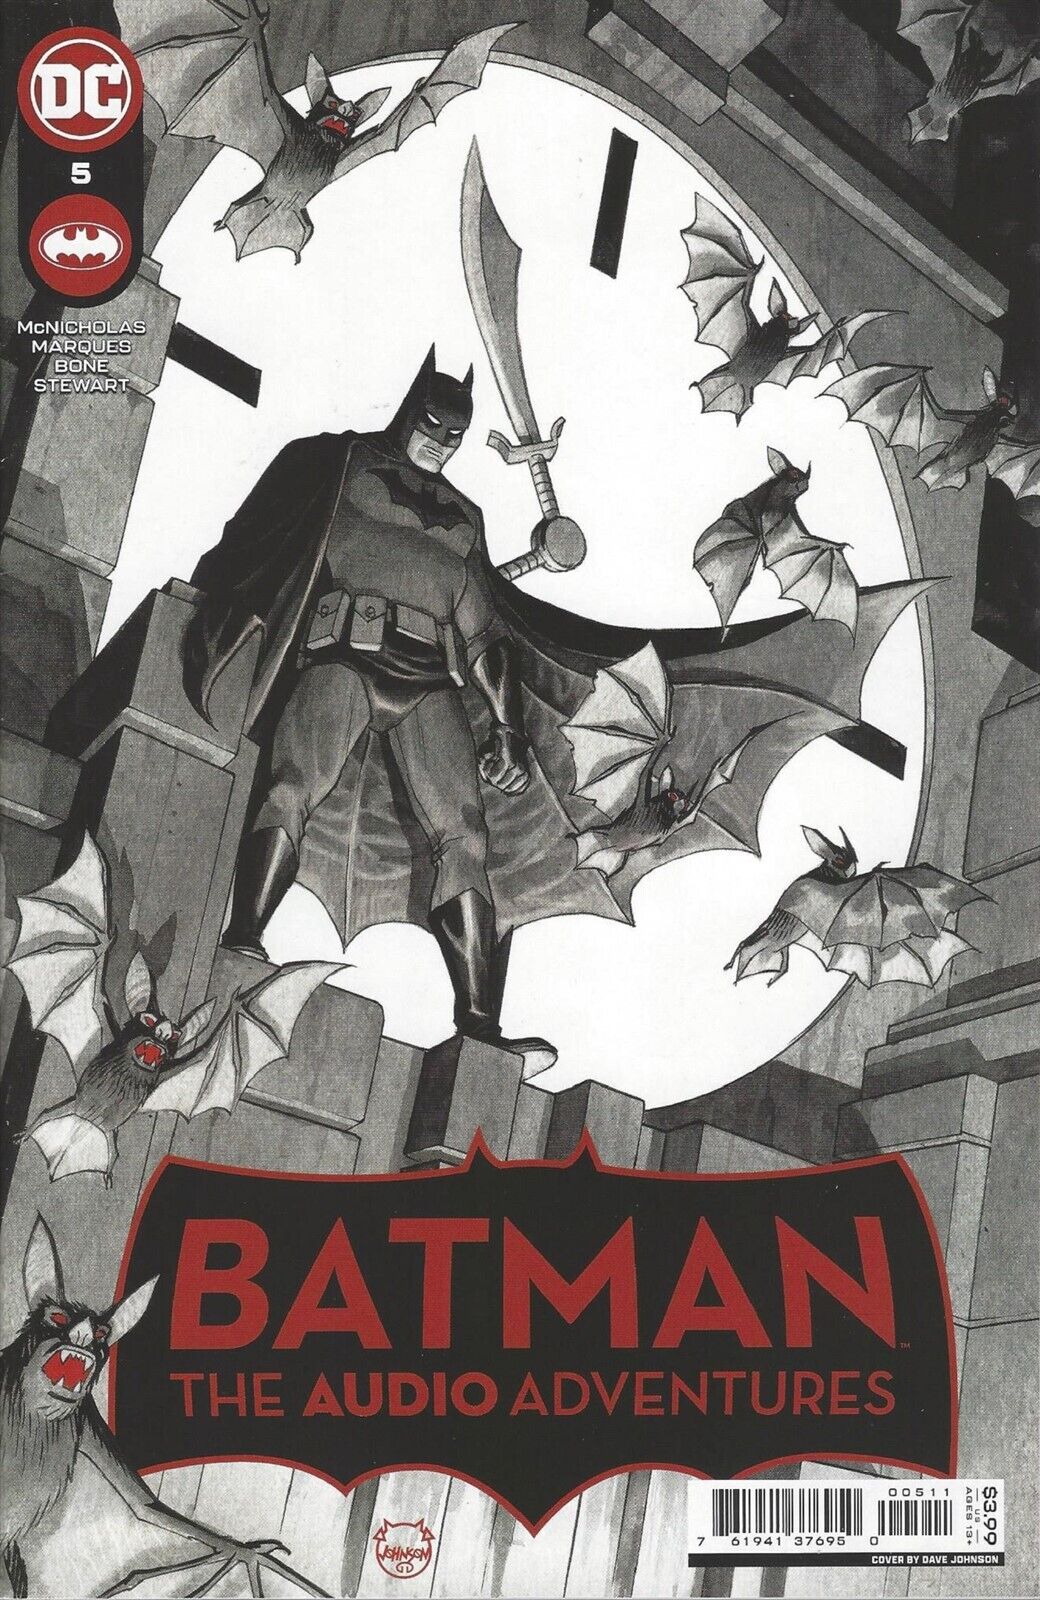 Batman: The Audio Adventures #5A Interlude: Here We Go Round The Sickly Fear